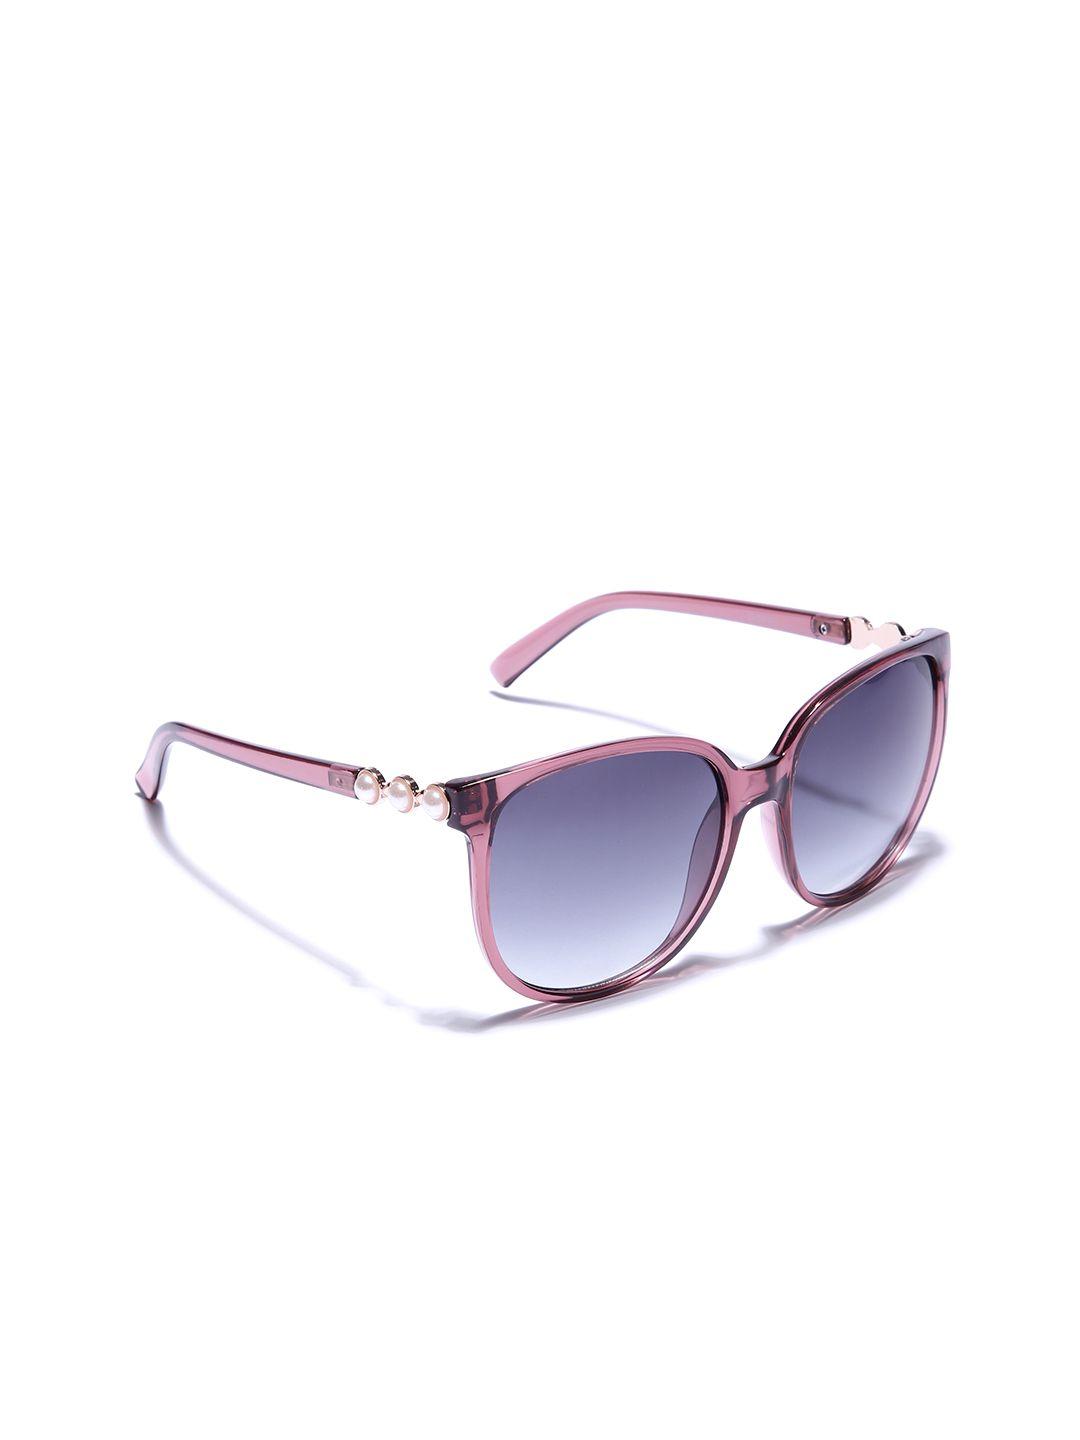 Carlton London Women Square Sunglasses with UV Protected Lens CLSW180